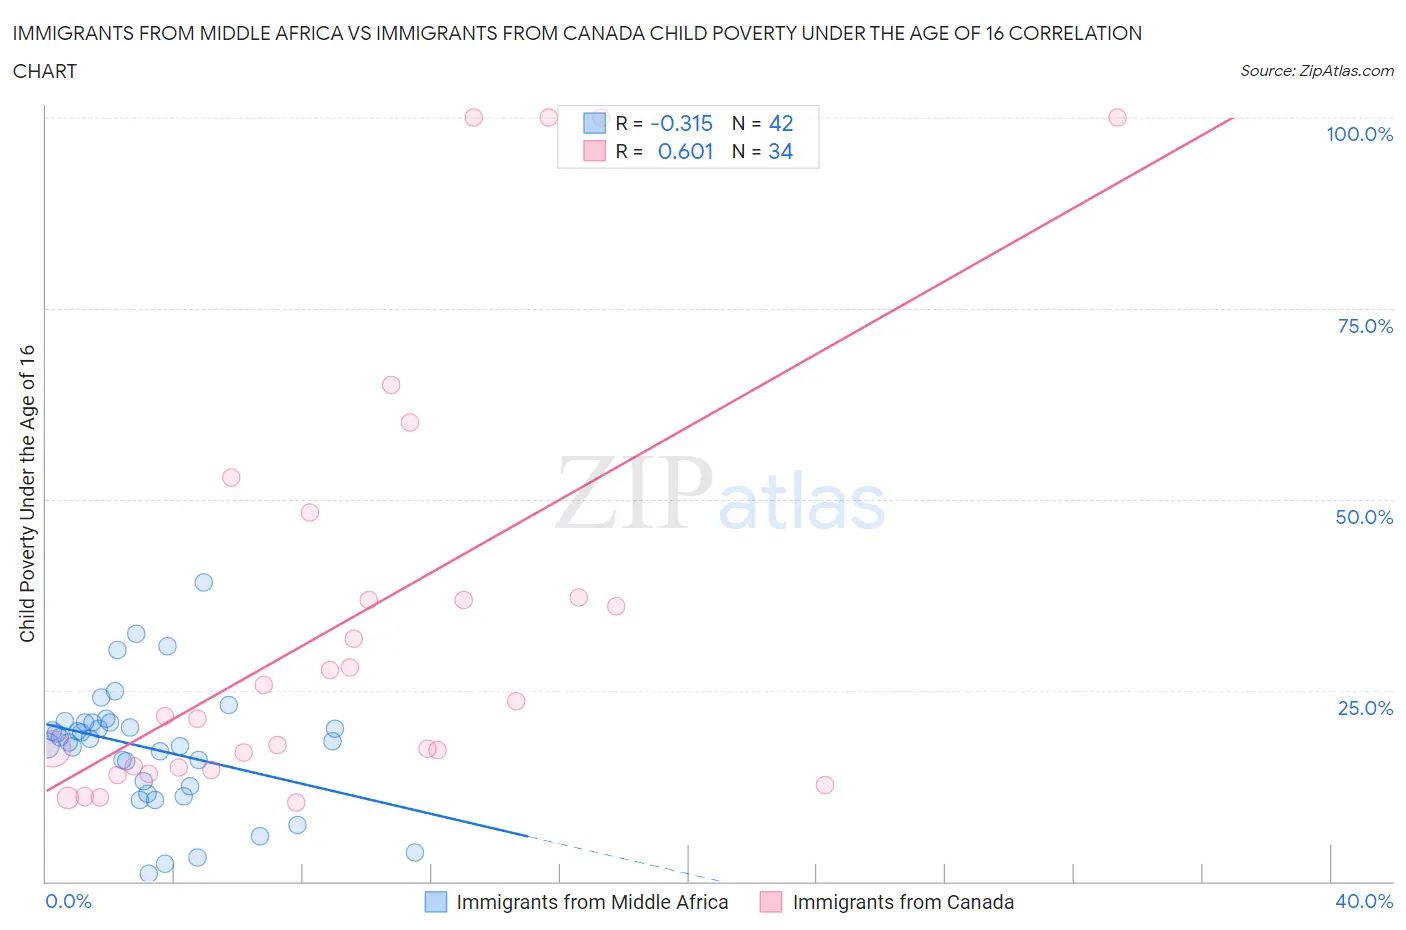 Immigrants from Middle Africa vs Immigrants from Canada Child Poverty Under the Age of 16